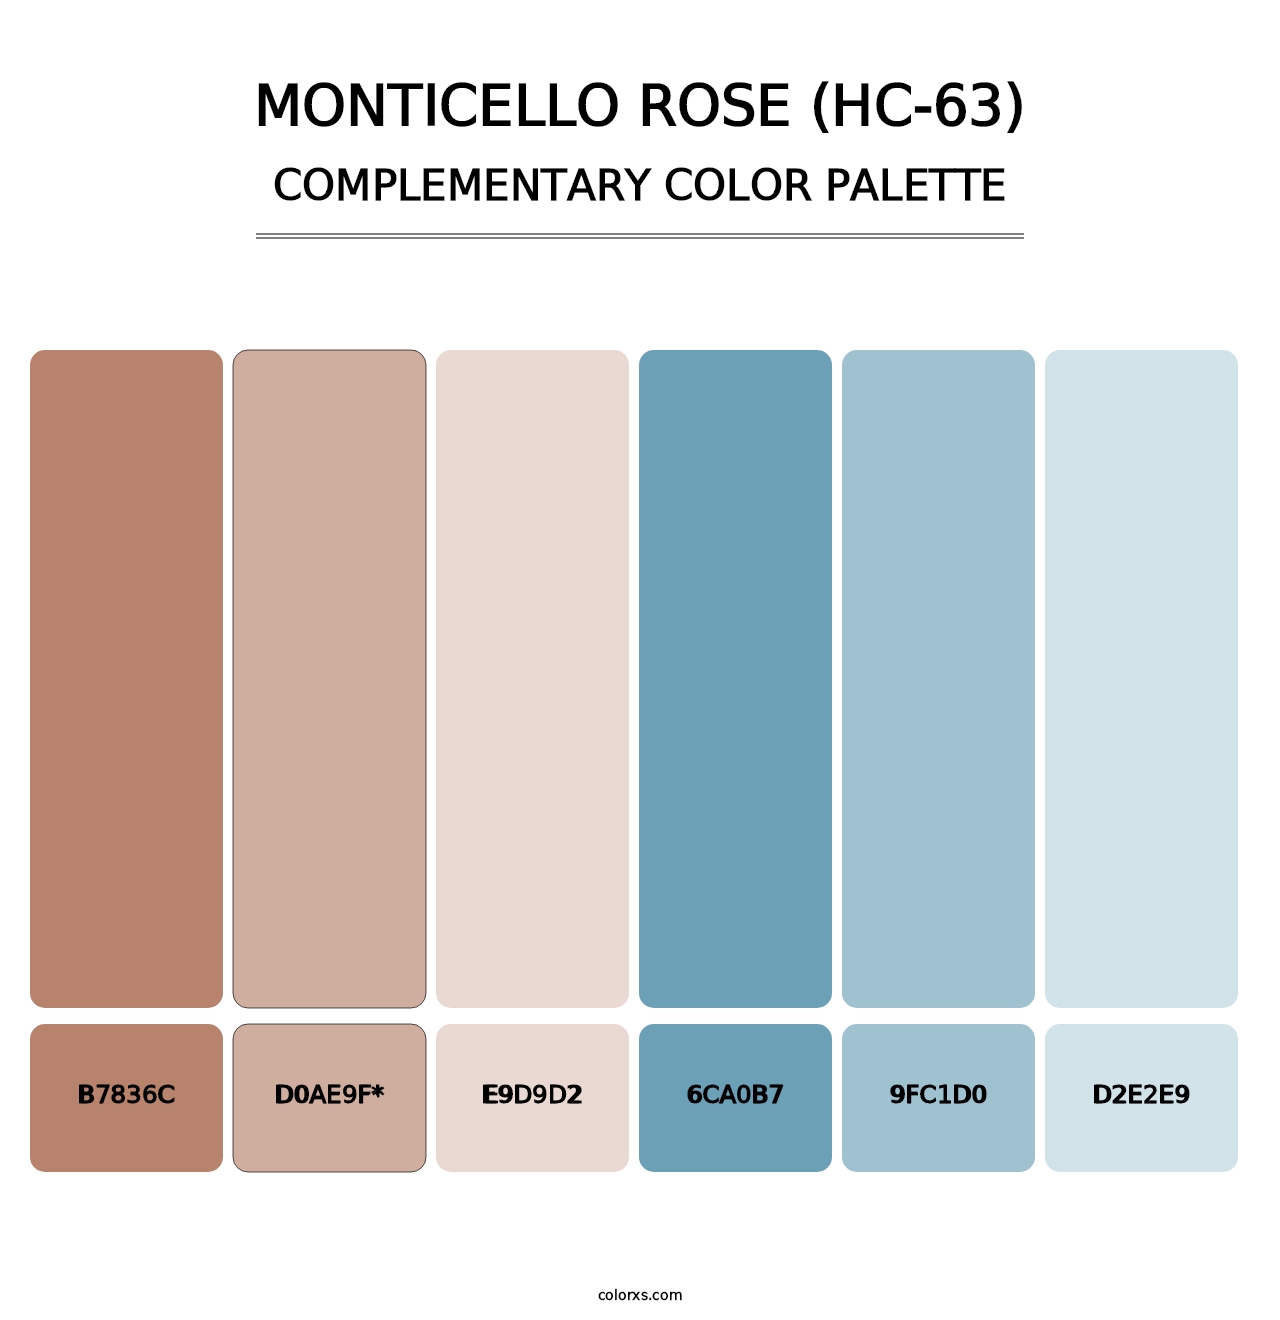 Monticello Rose (HC-63) - Complementary Color Palette